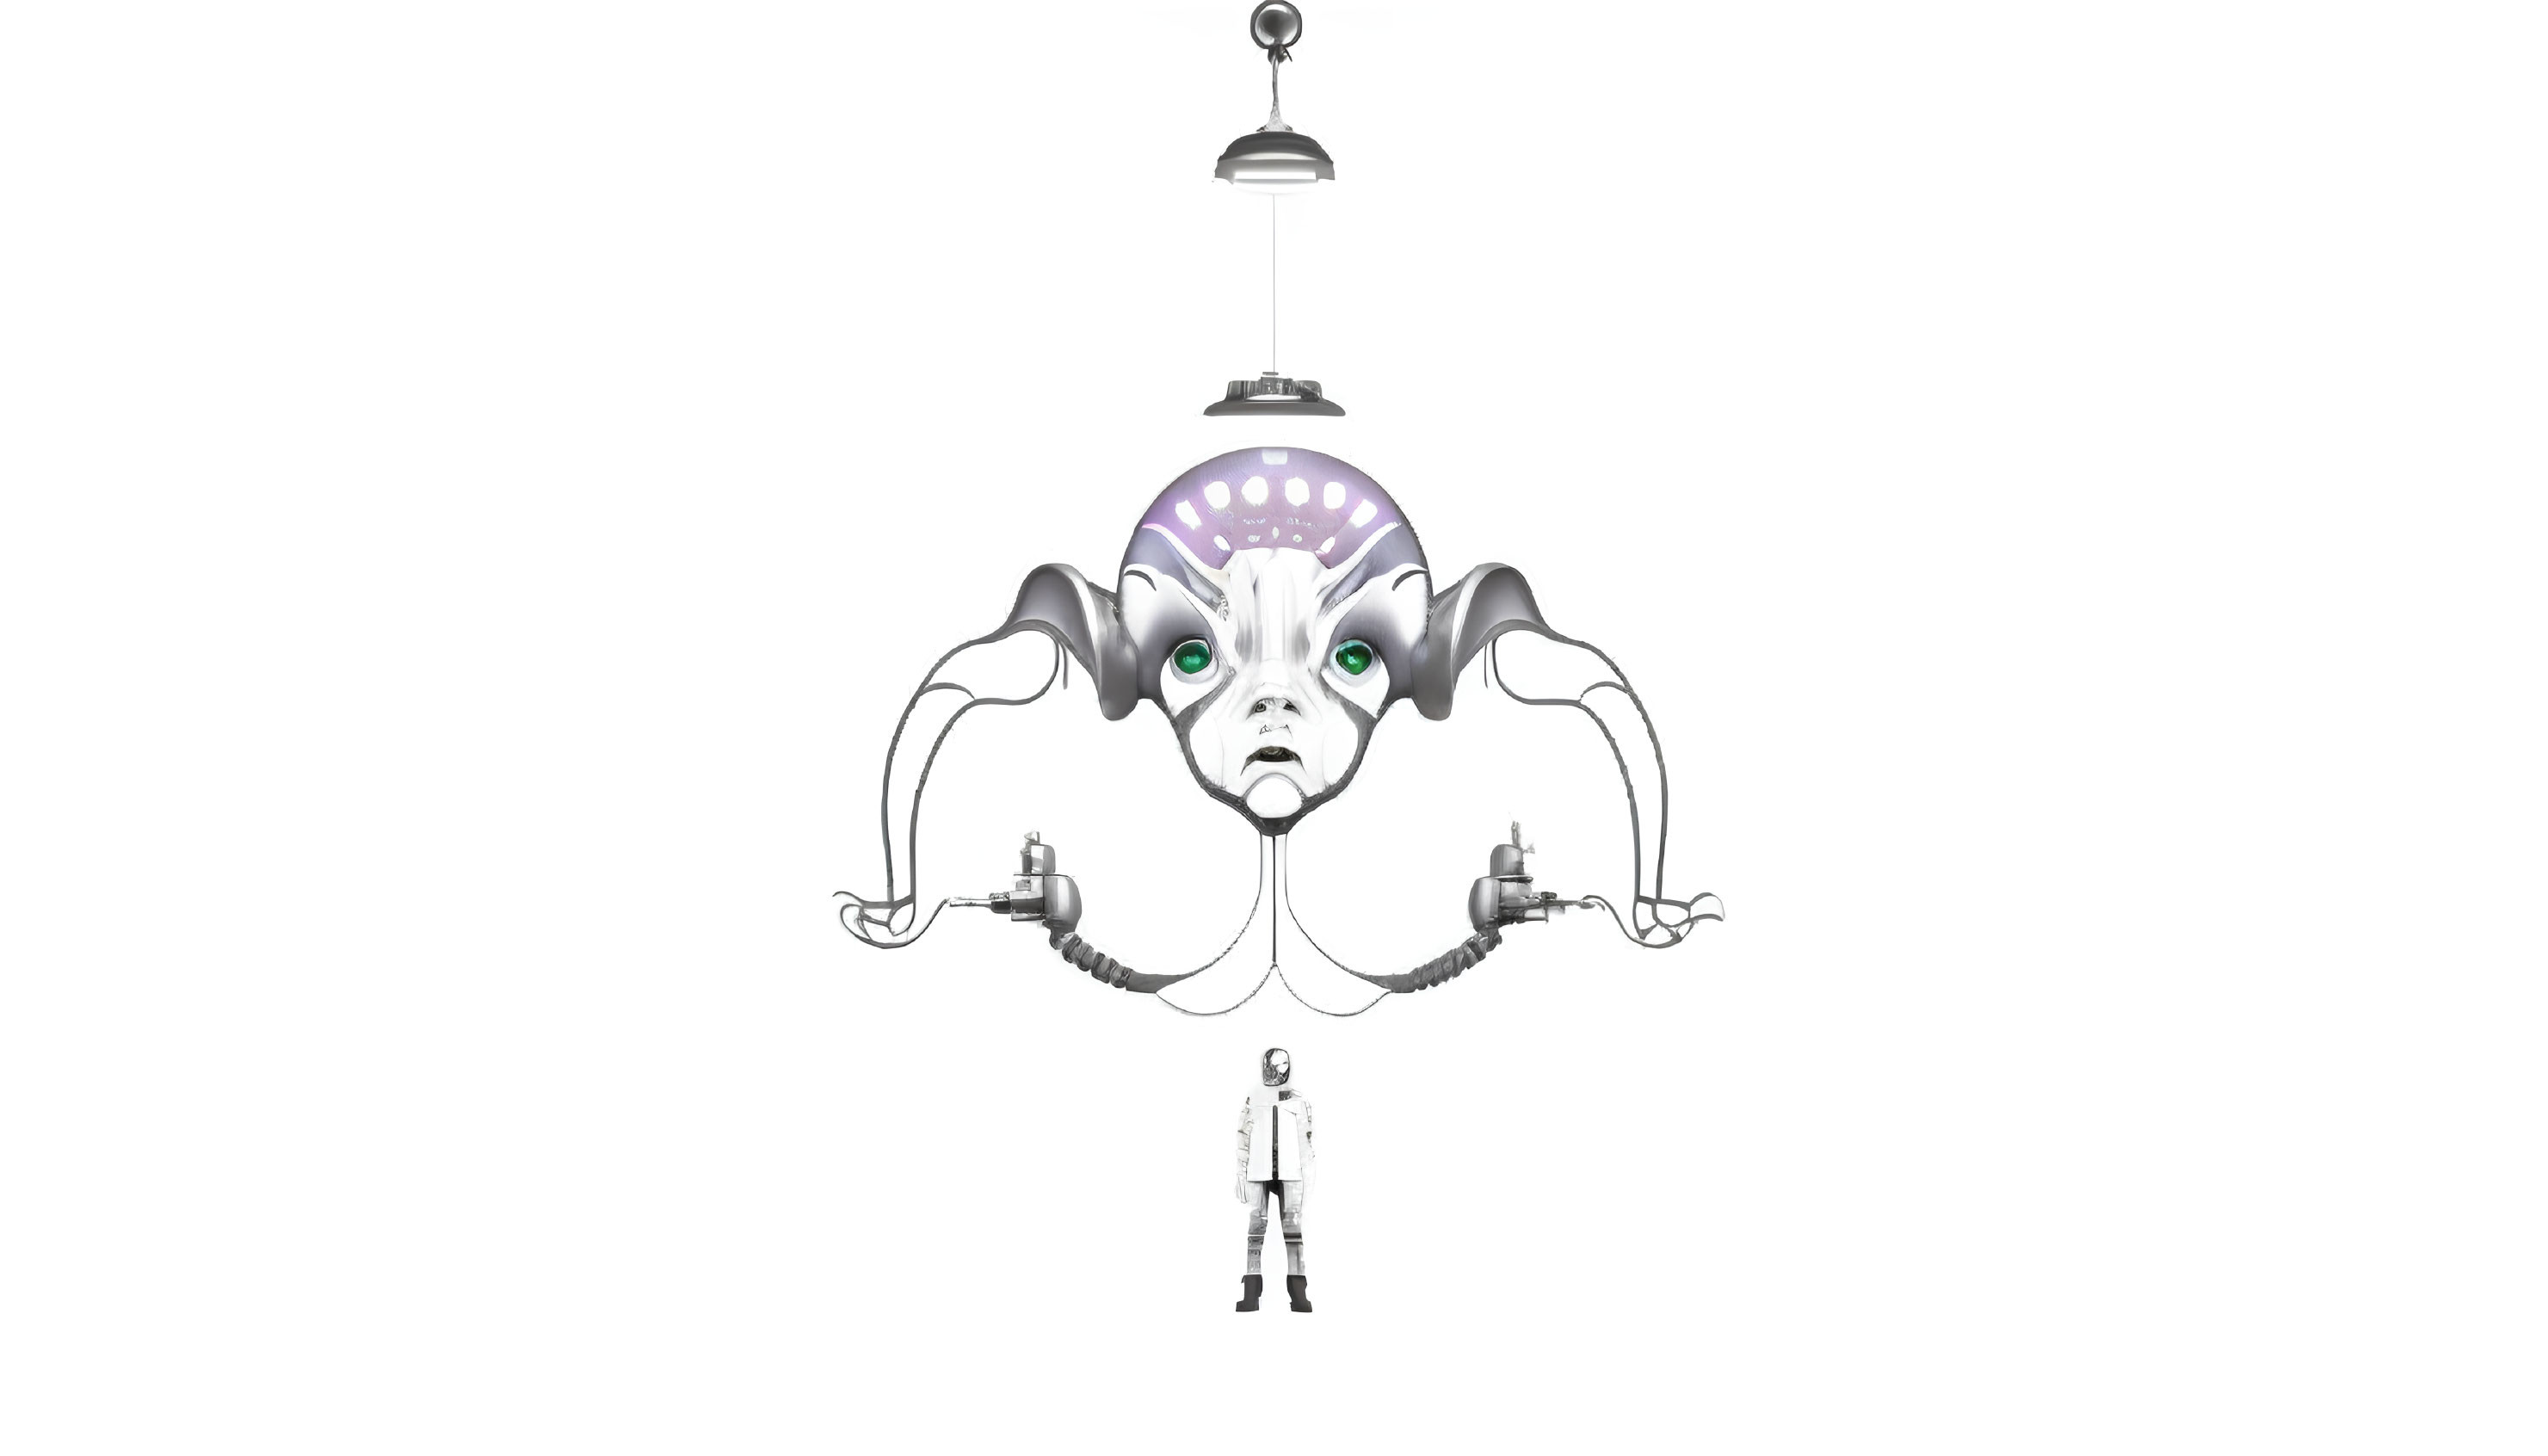 Sci-fi Chandelier with Alien-Like Tentacles and Humanoid Figure